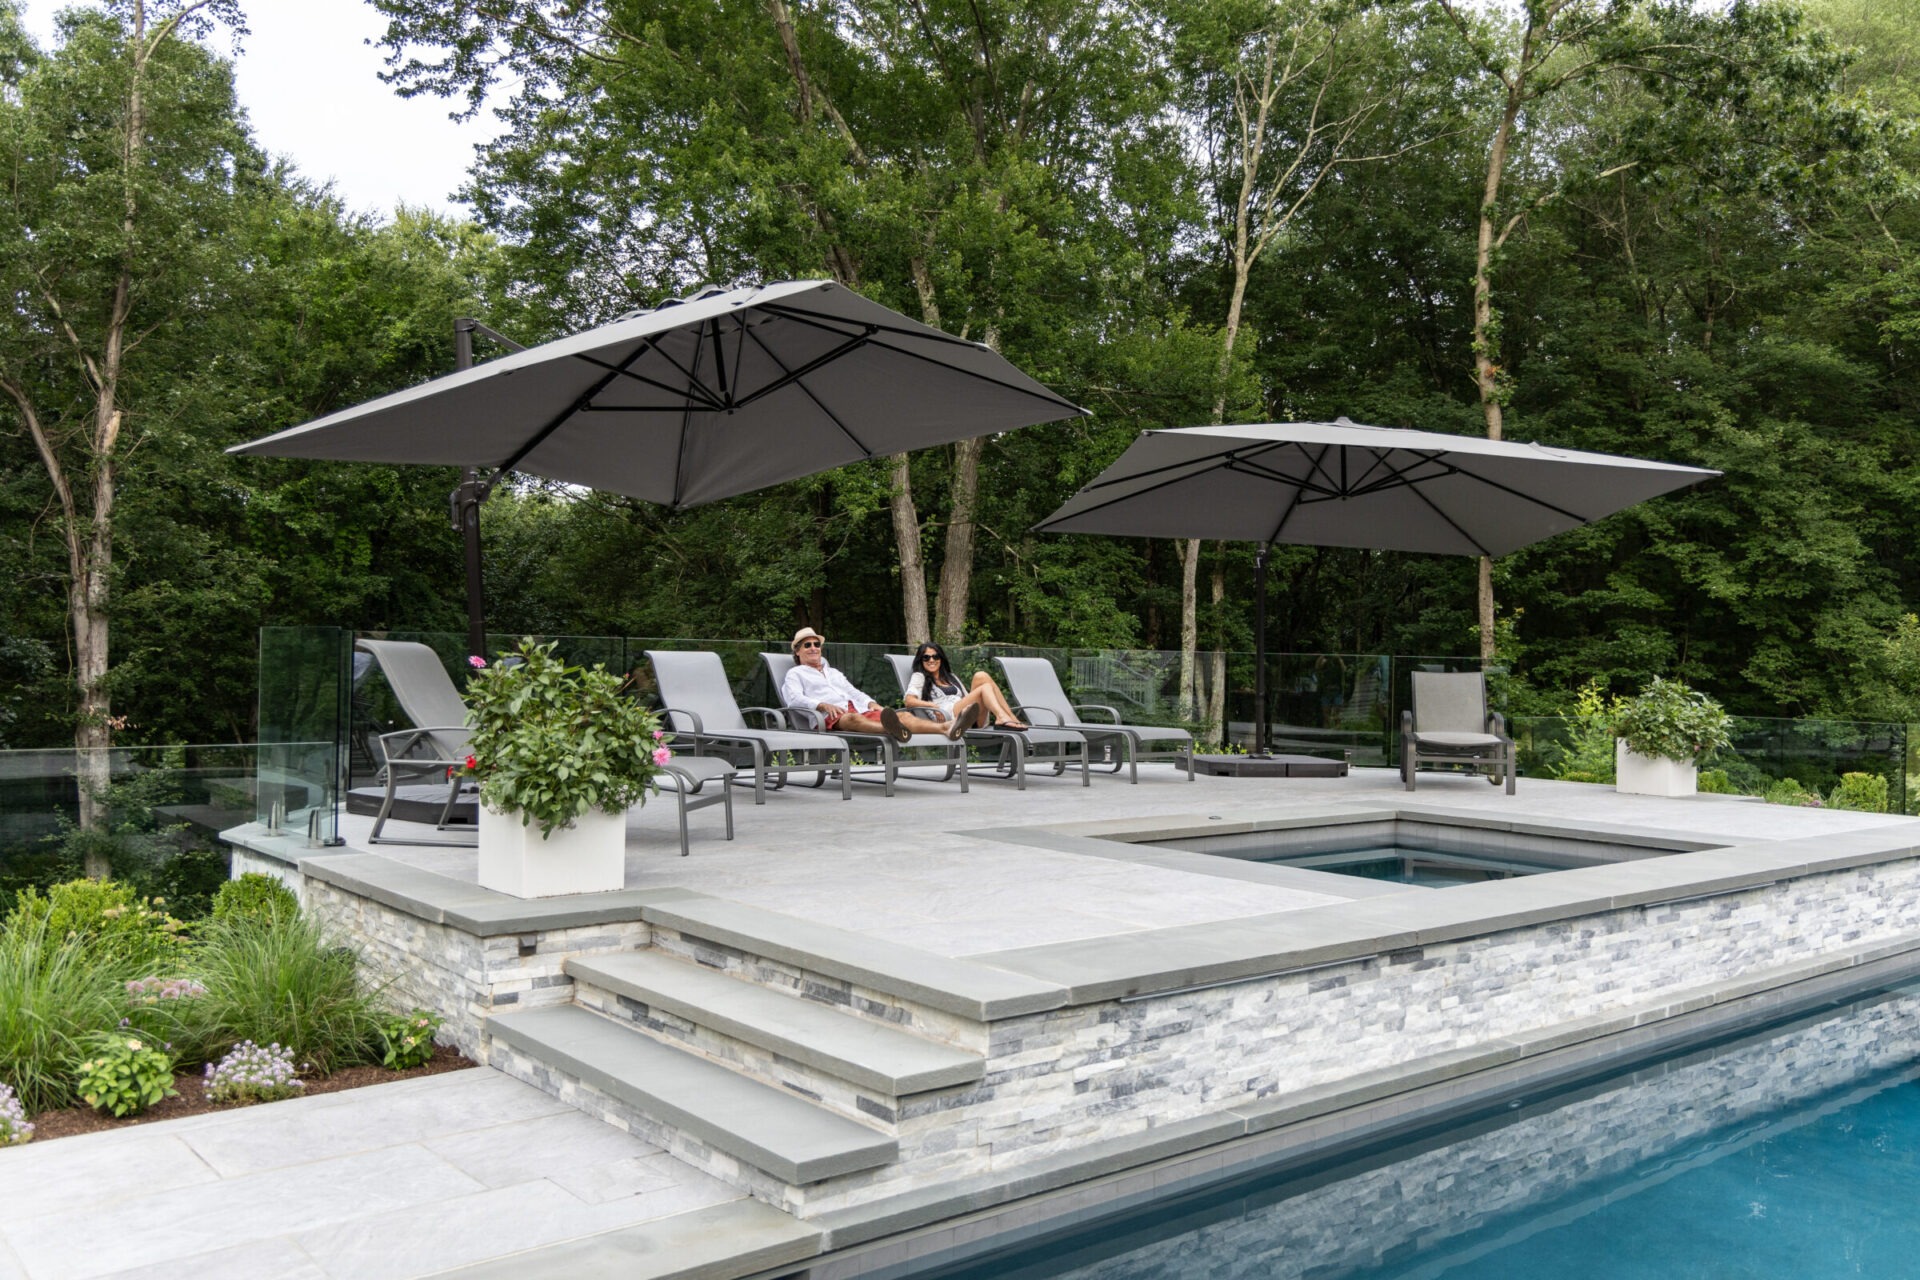 This image shows a luxurious poolside area with two persons lounging on chairs under umbrellas, surrounded by lush trees and clear skies.